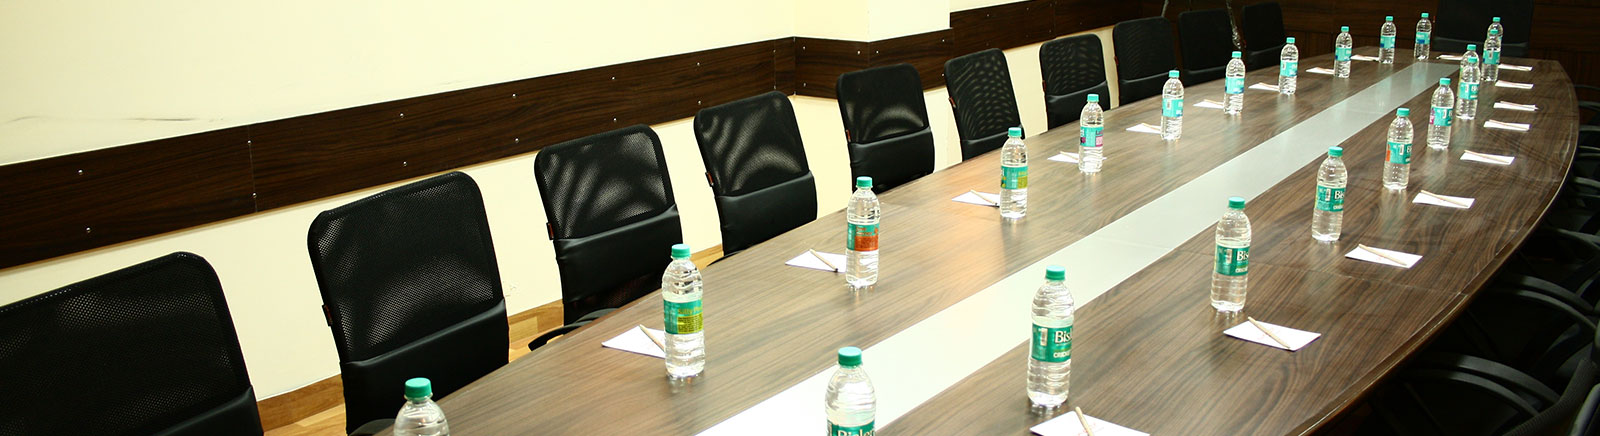 Ginger Manesar Hotel Services & Facilities